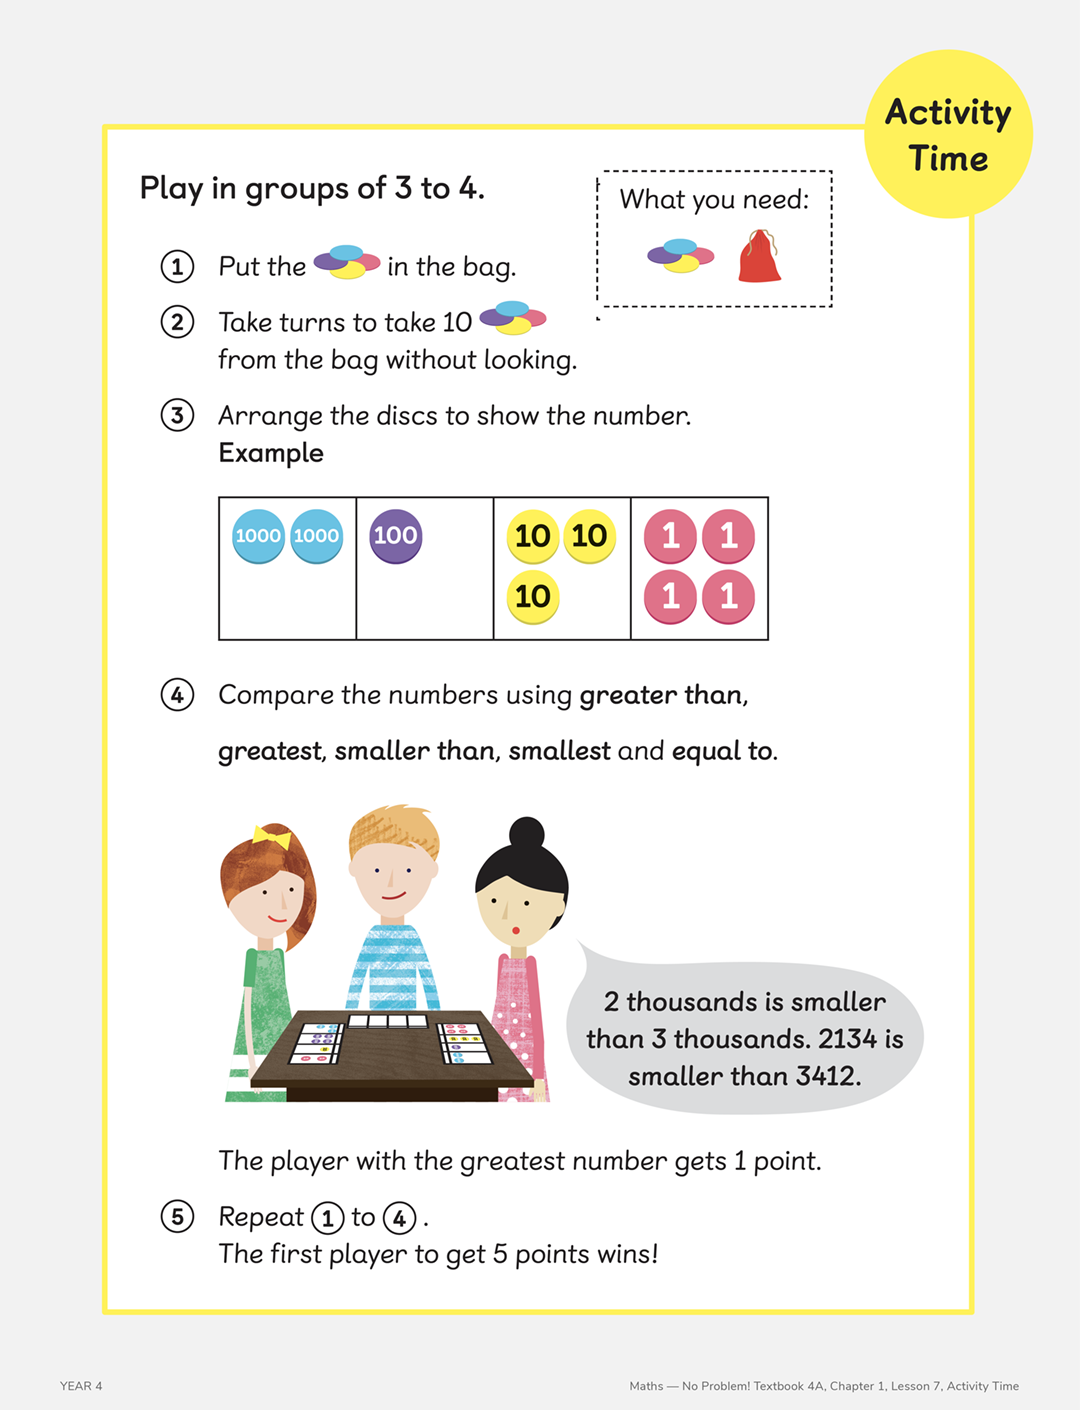 year 4 textbook 4a chapter 1 lesson 7 activity time